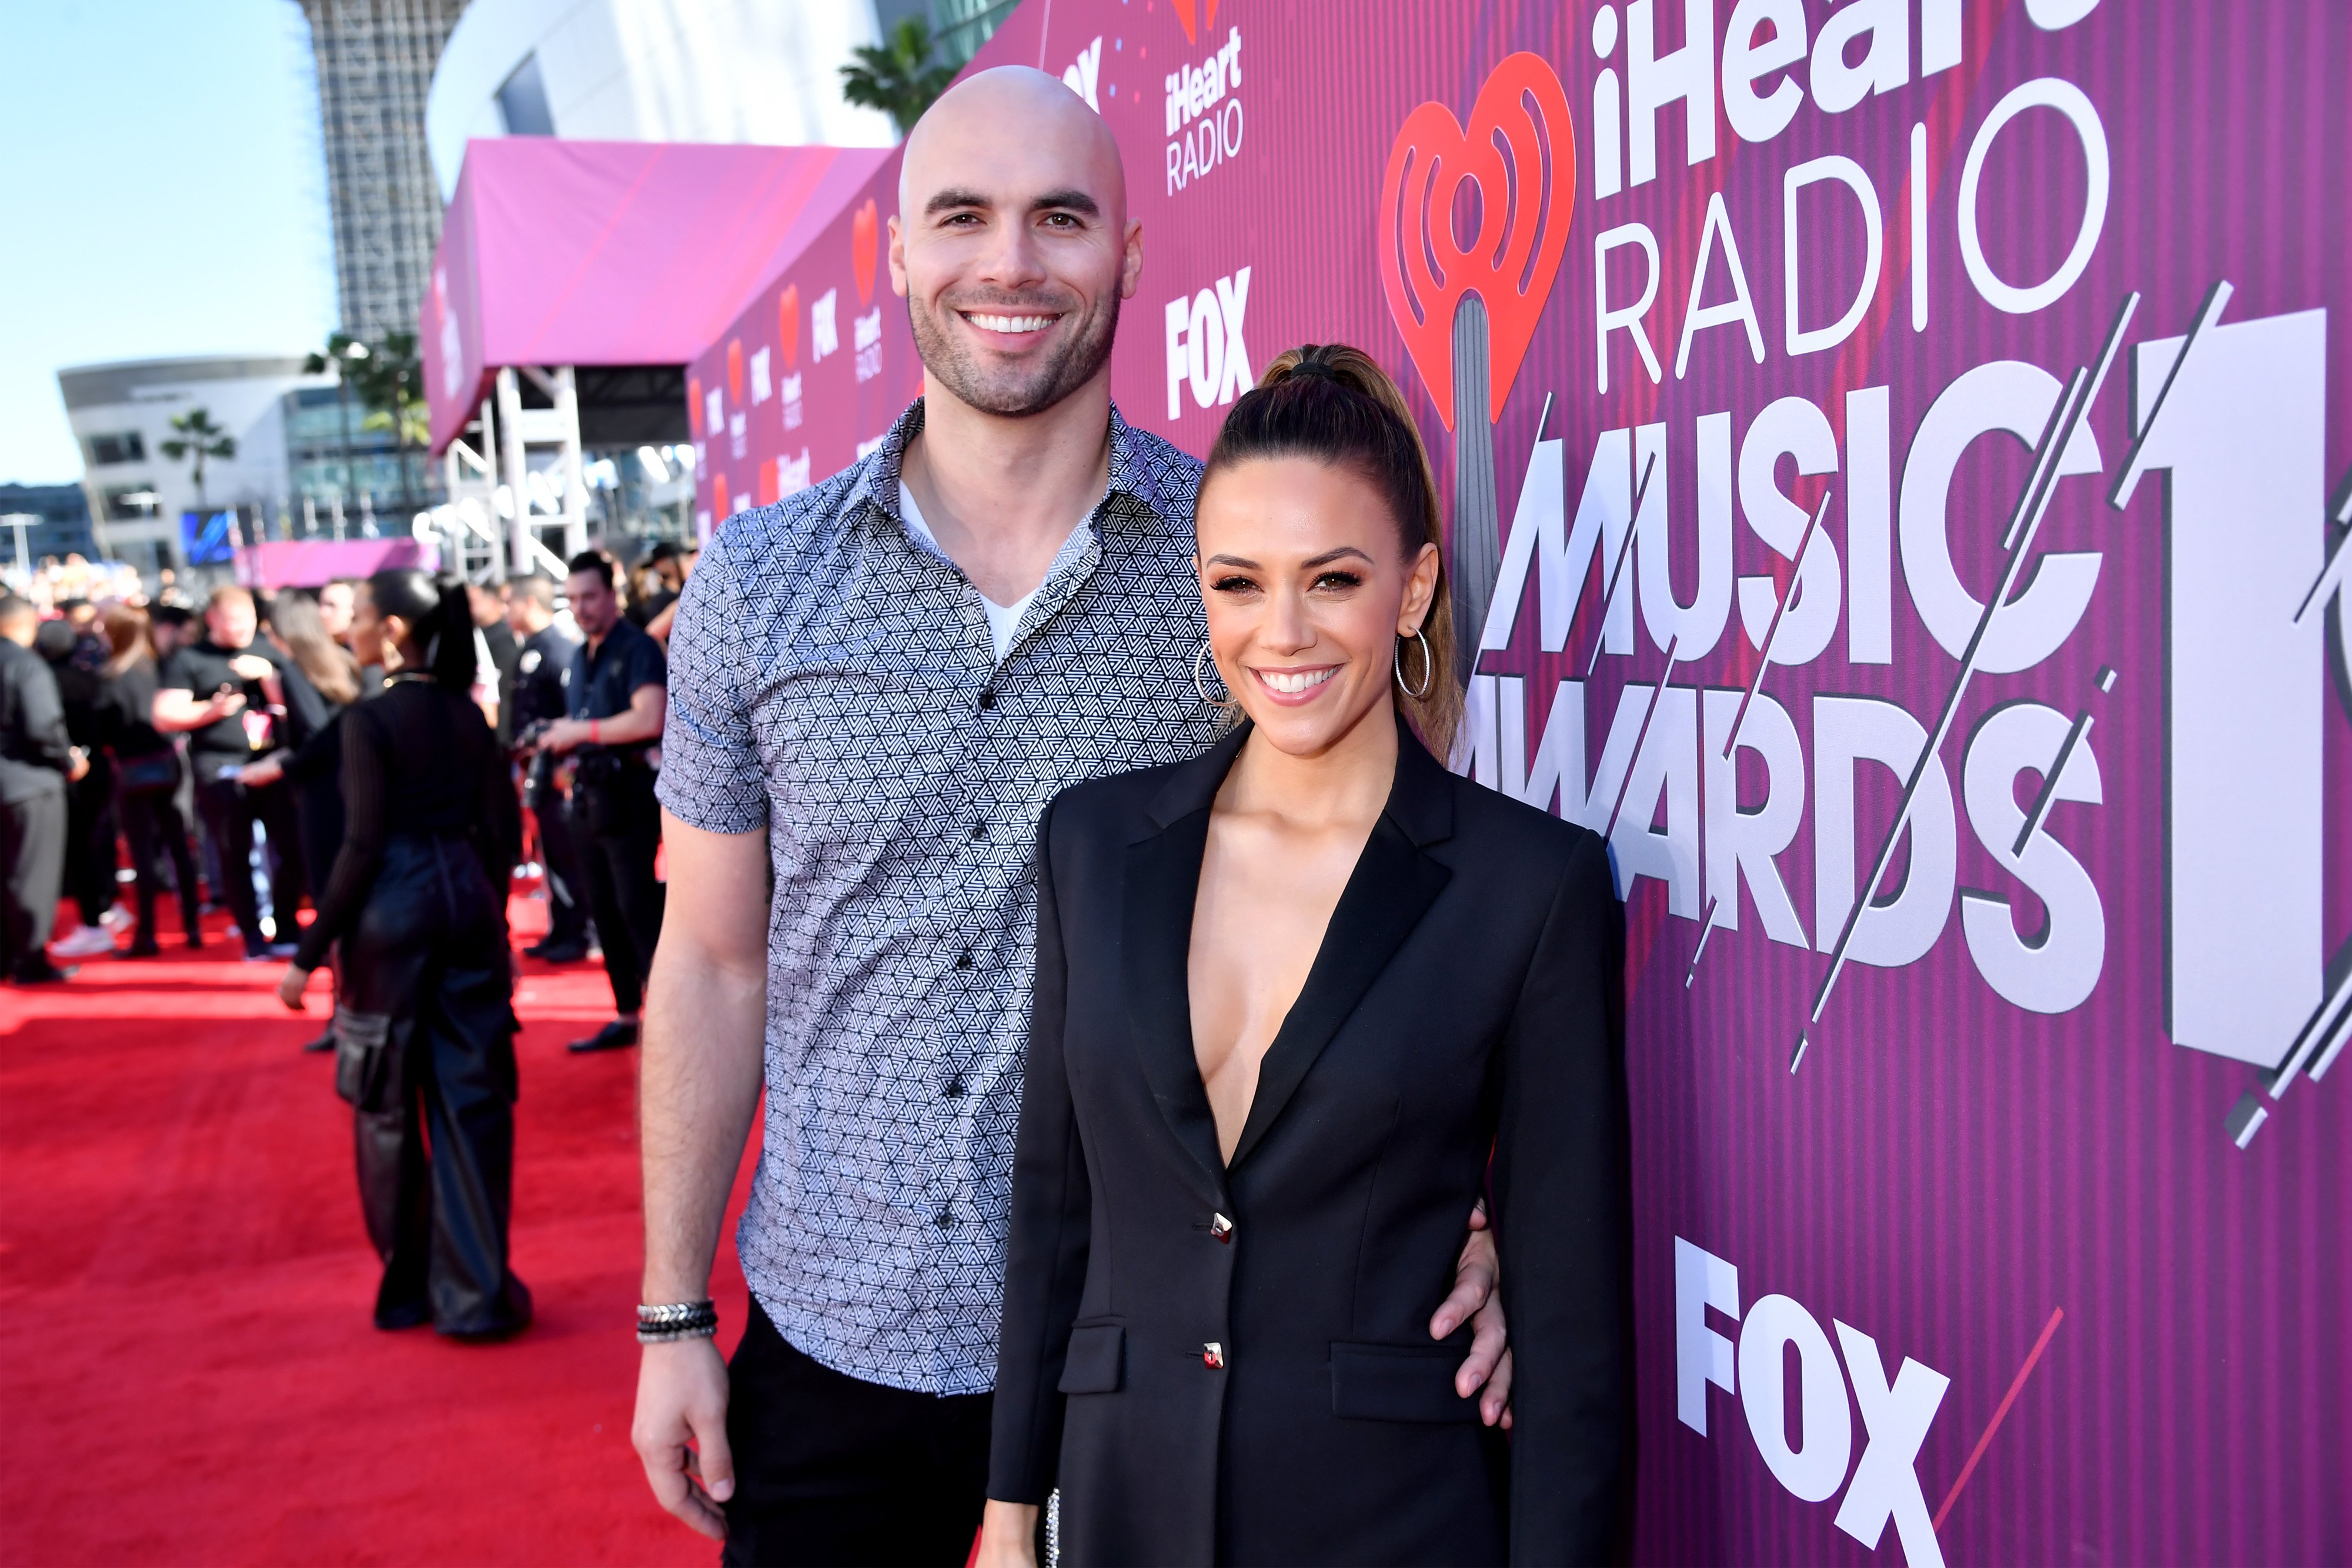 Mike Caussin and Jana Kramer at the 2019 iHeartRadio Music Awards in California on March 14, 2019 | Source: Getty Images